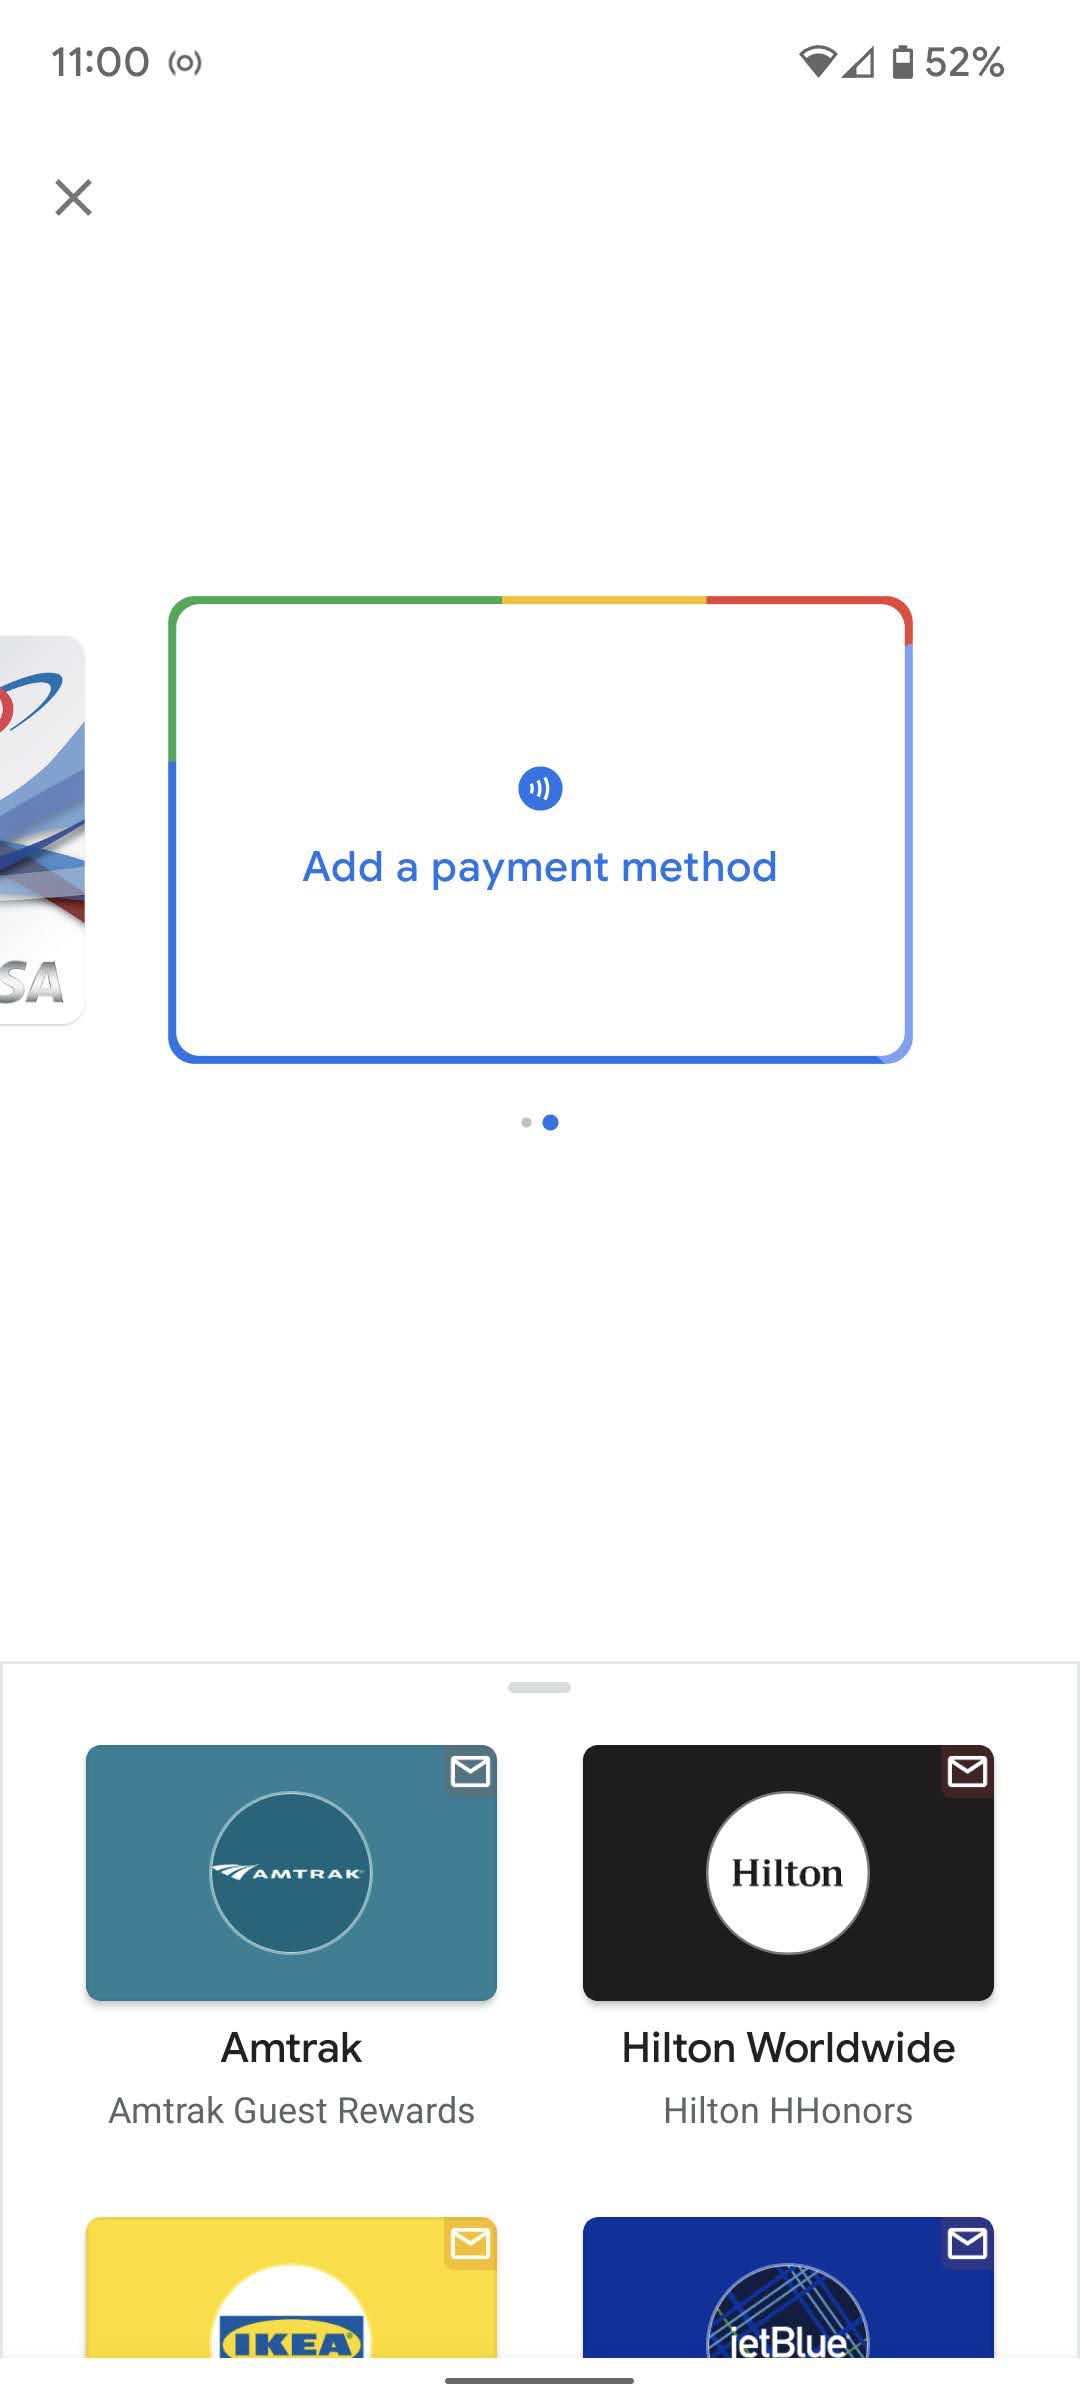 You can add a new payment source on the Ready to pay screen.